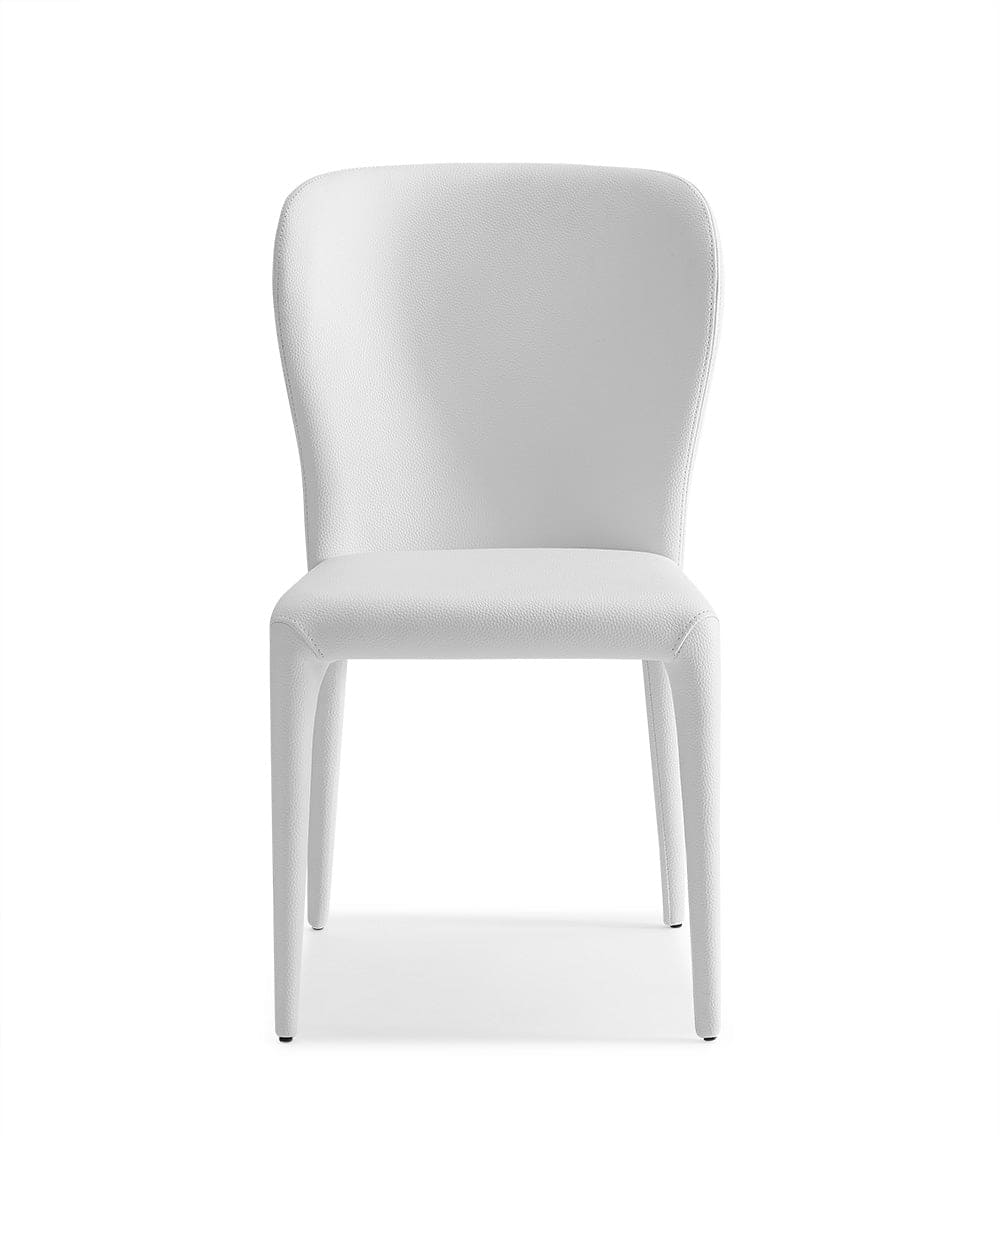 Set of Two White Upholstered Faux Leather Dining Side Chairs